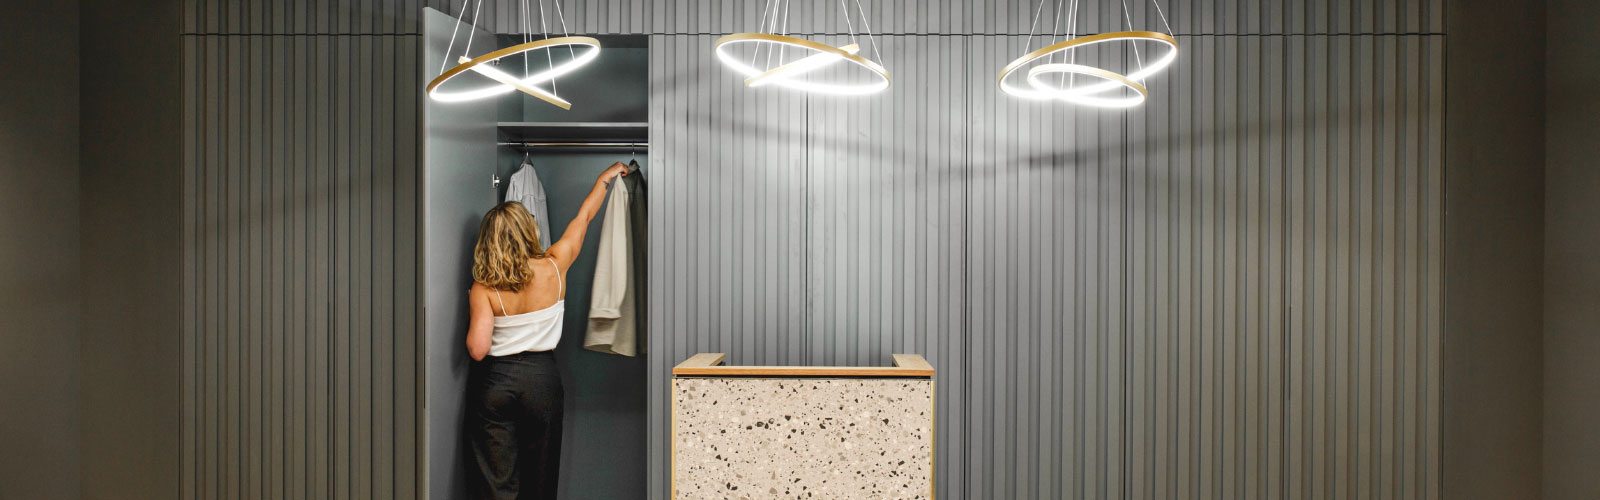 Young professional in office using sleek modern cloakroom with abstract lights 